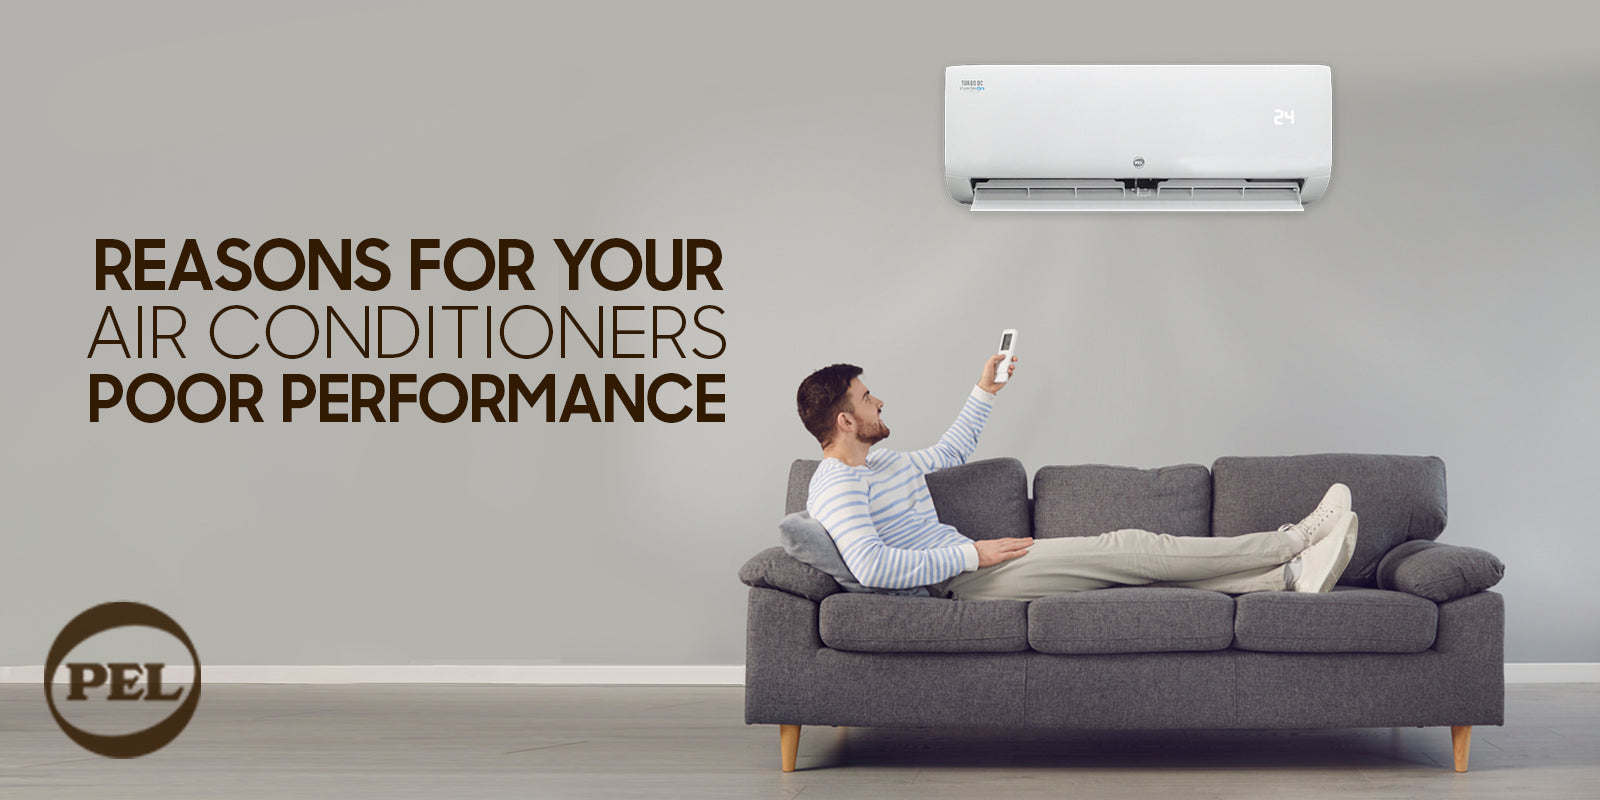 Reasons for Your Air Conditioner's Poor Performance